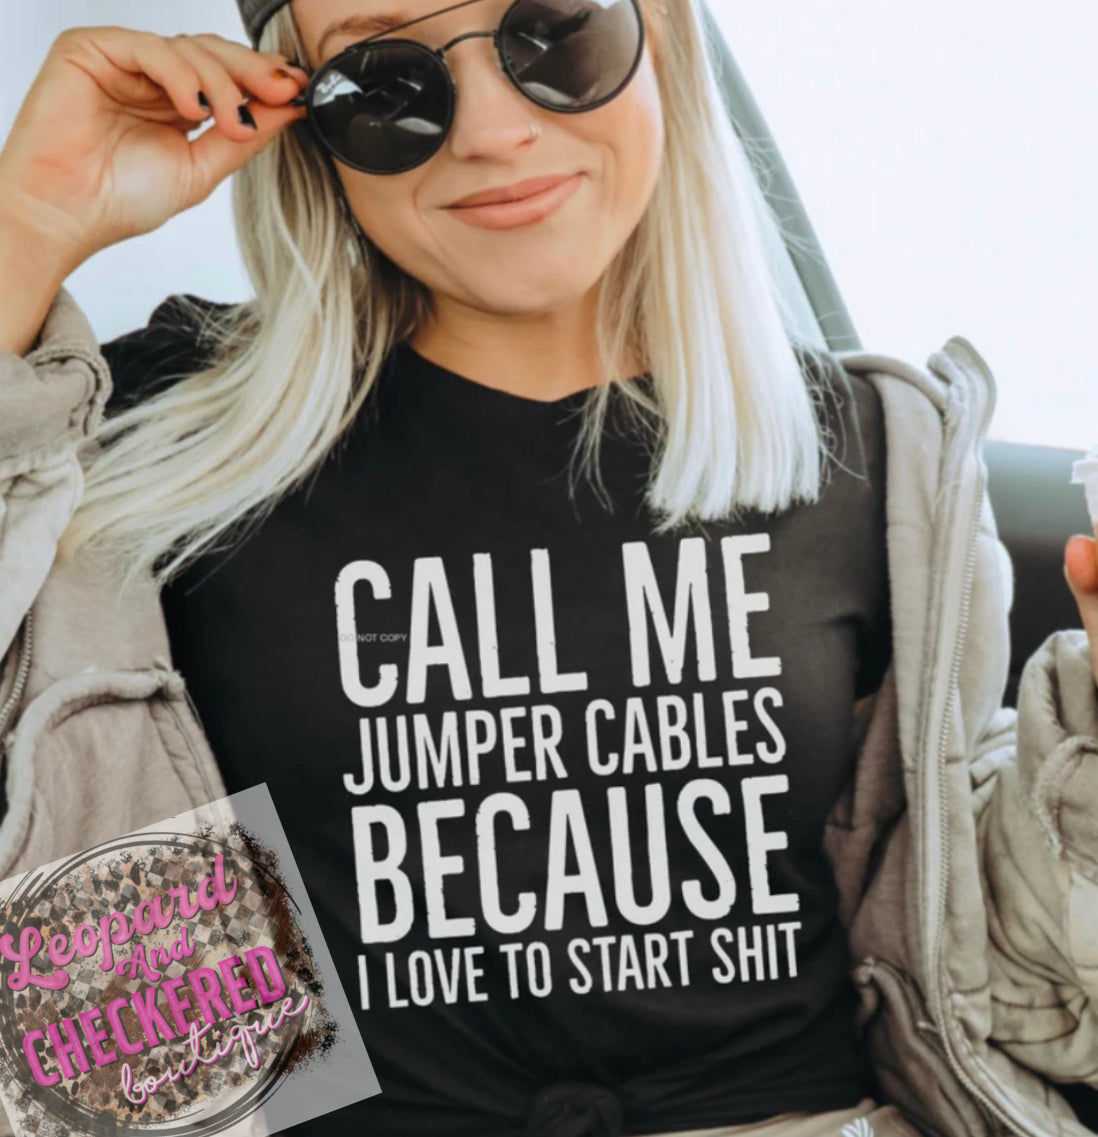 Call me jumper cables because I love to start shit Tshirt